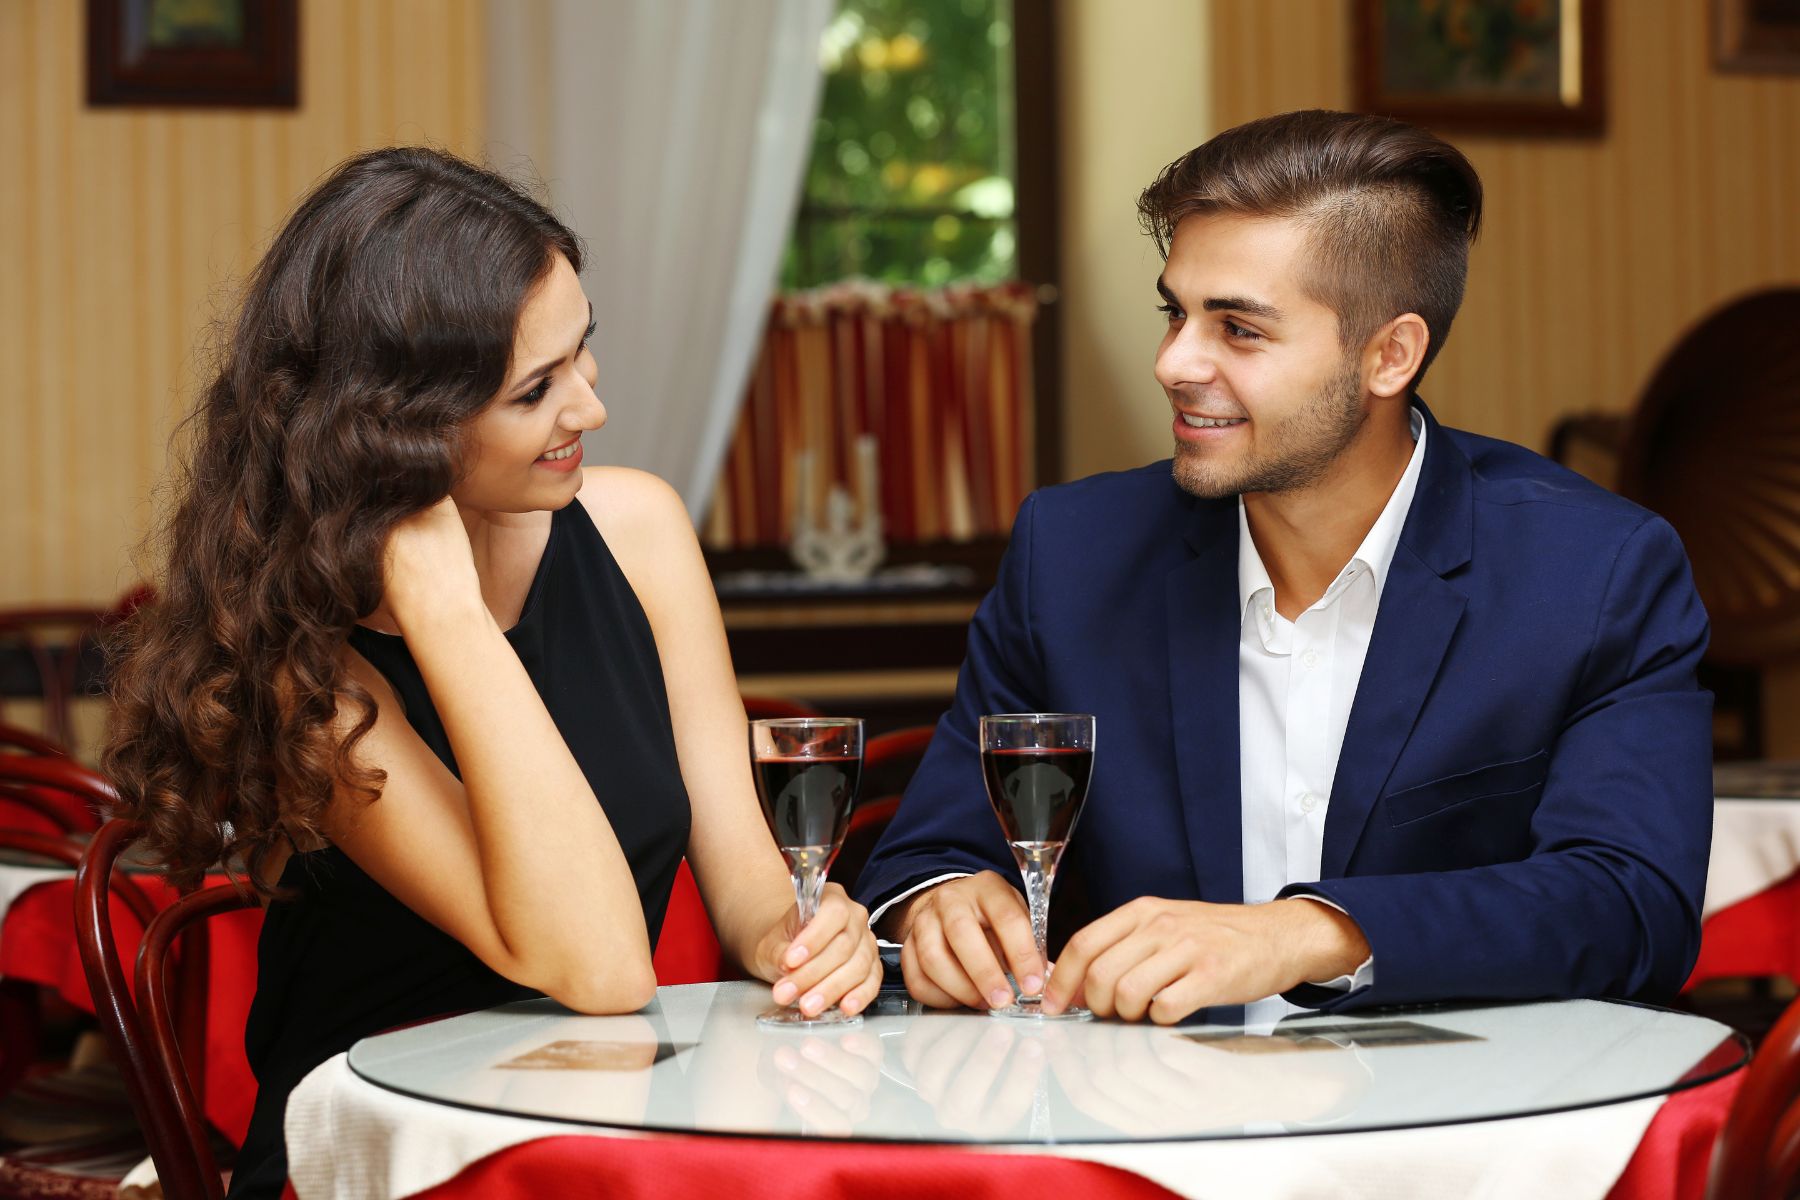 attractive young couple dating at the restaurant, sharing a drink and smiling at each other